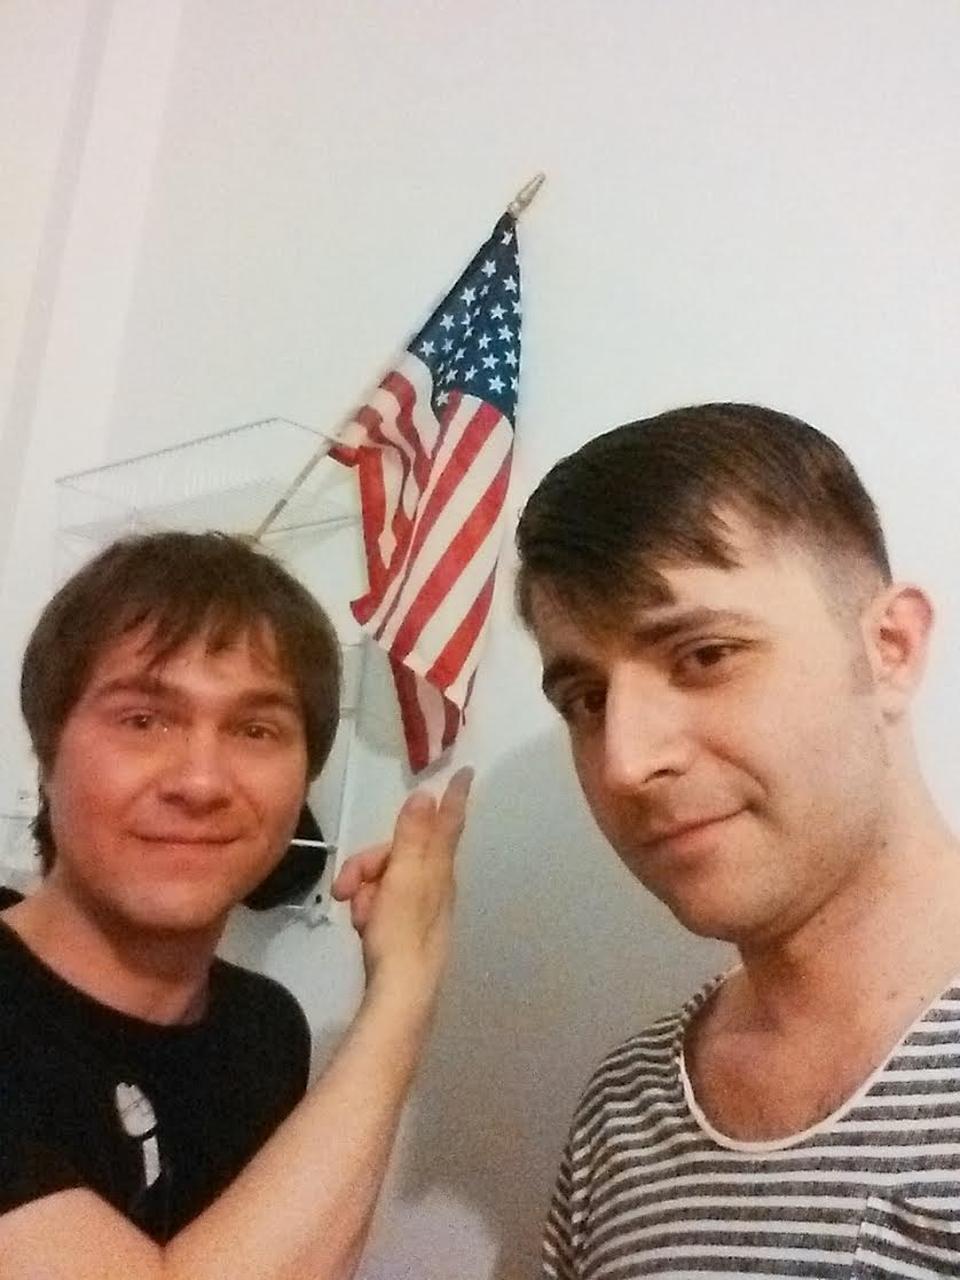 This is the American flag he hung up in our room in order to mock us and our country. 